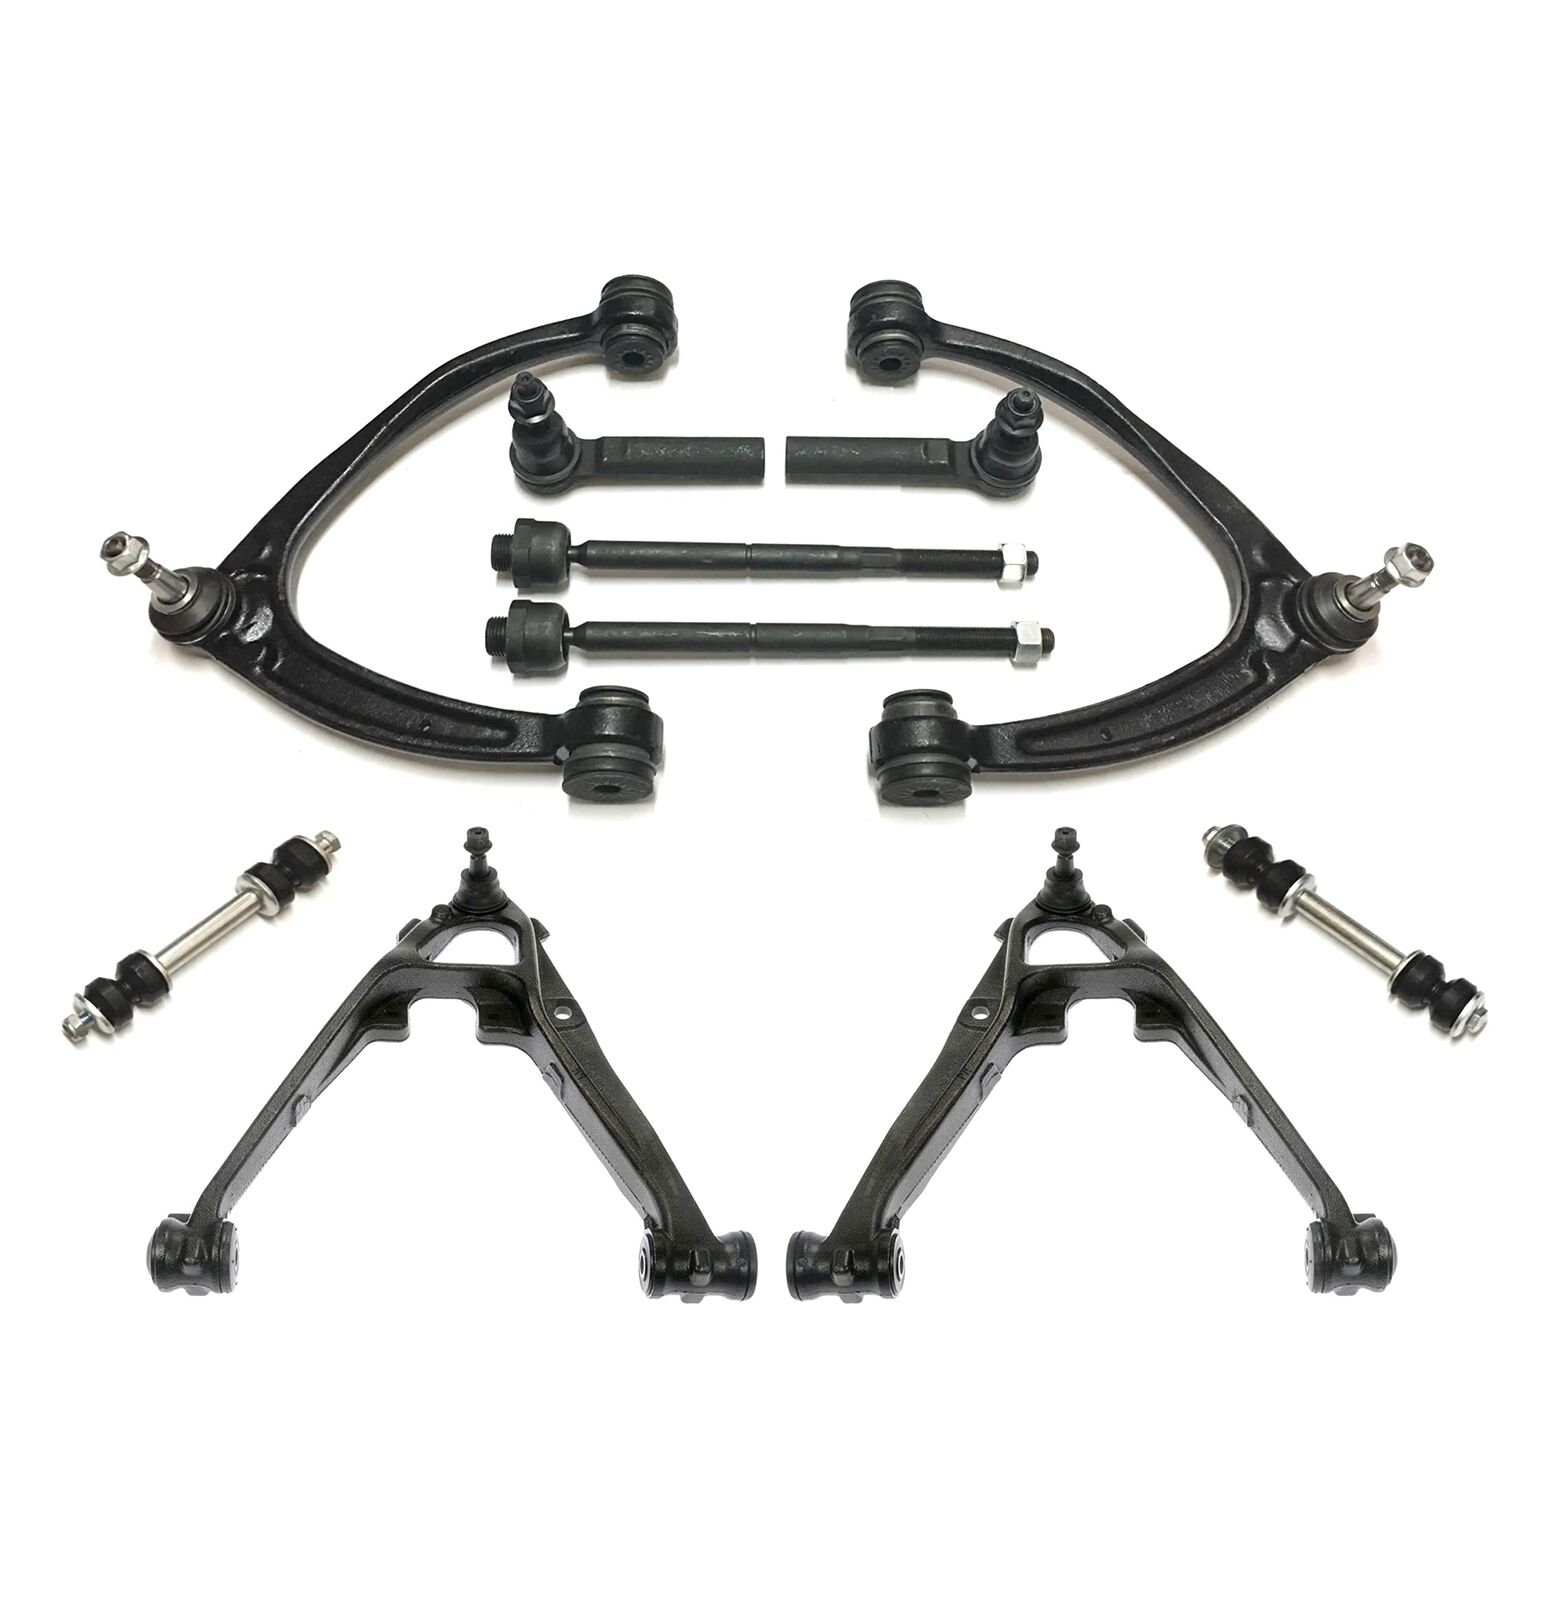 10 Pc Steering Suspension Kit for Control Arm Tie Rod Sway Bar for Chevrolet GMC